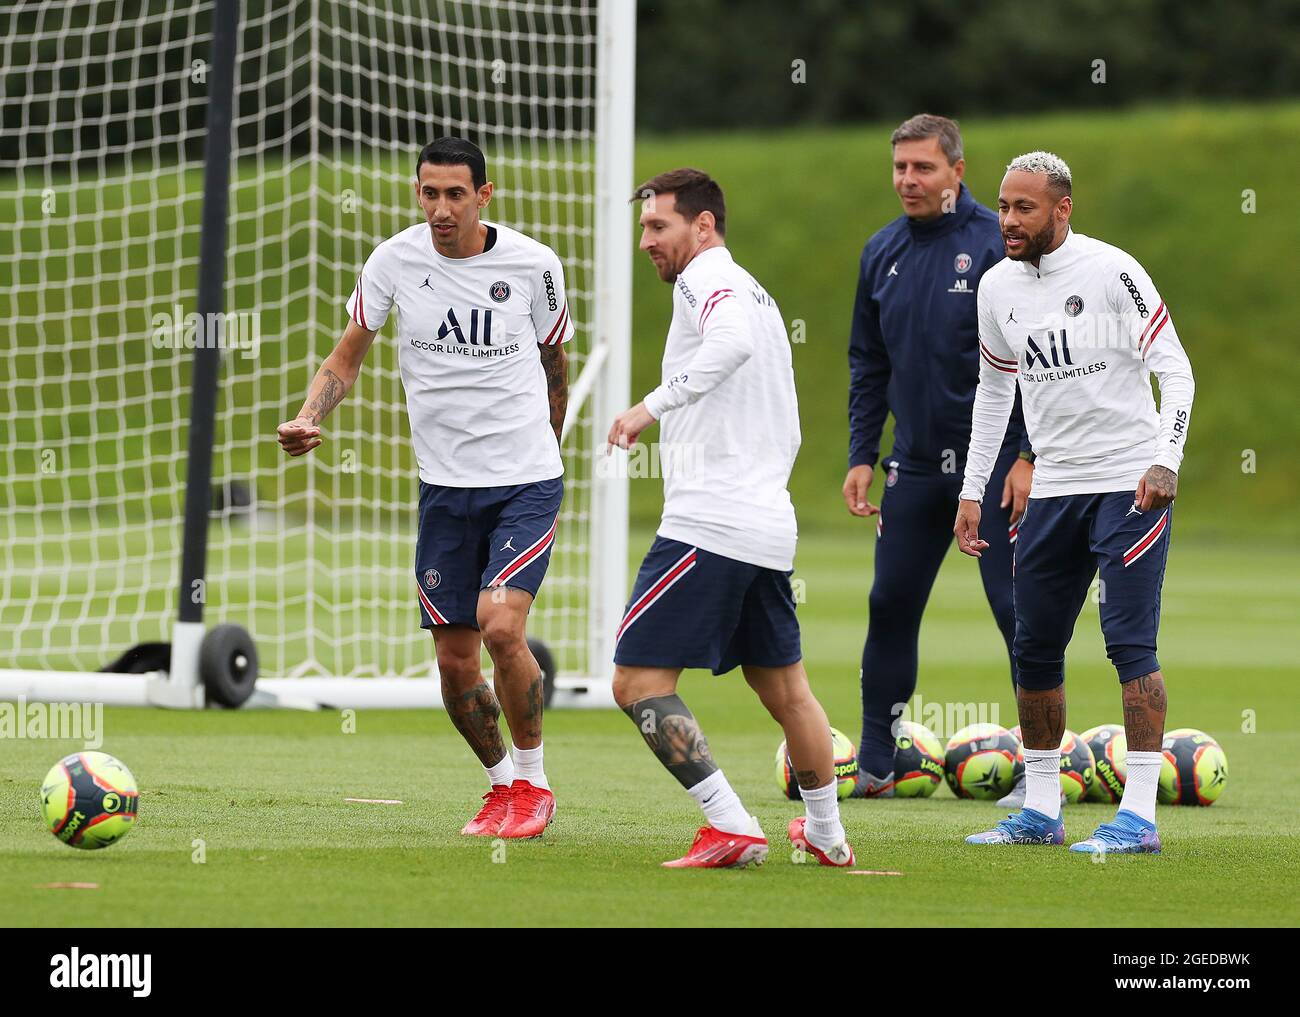 Paris, France. 19th Aug, 2021. Lionel Messi (2nd L), Neymar (1st R) and Angel Di Maria (1st L) of Paris Saint-Germain attend a training session at the Camp des Loges Paris Saint-Germain football club's training ground in Saint-Germain-en-Laye, northwest of Paris, France, Aug. 19, 2021. Credit: Gao Jing/Xinhua/Alamy Live News Stock Photo